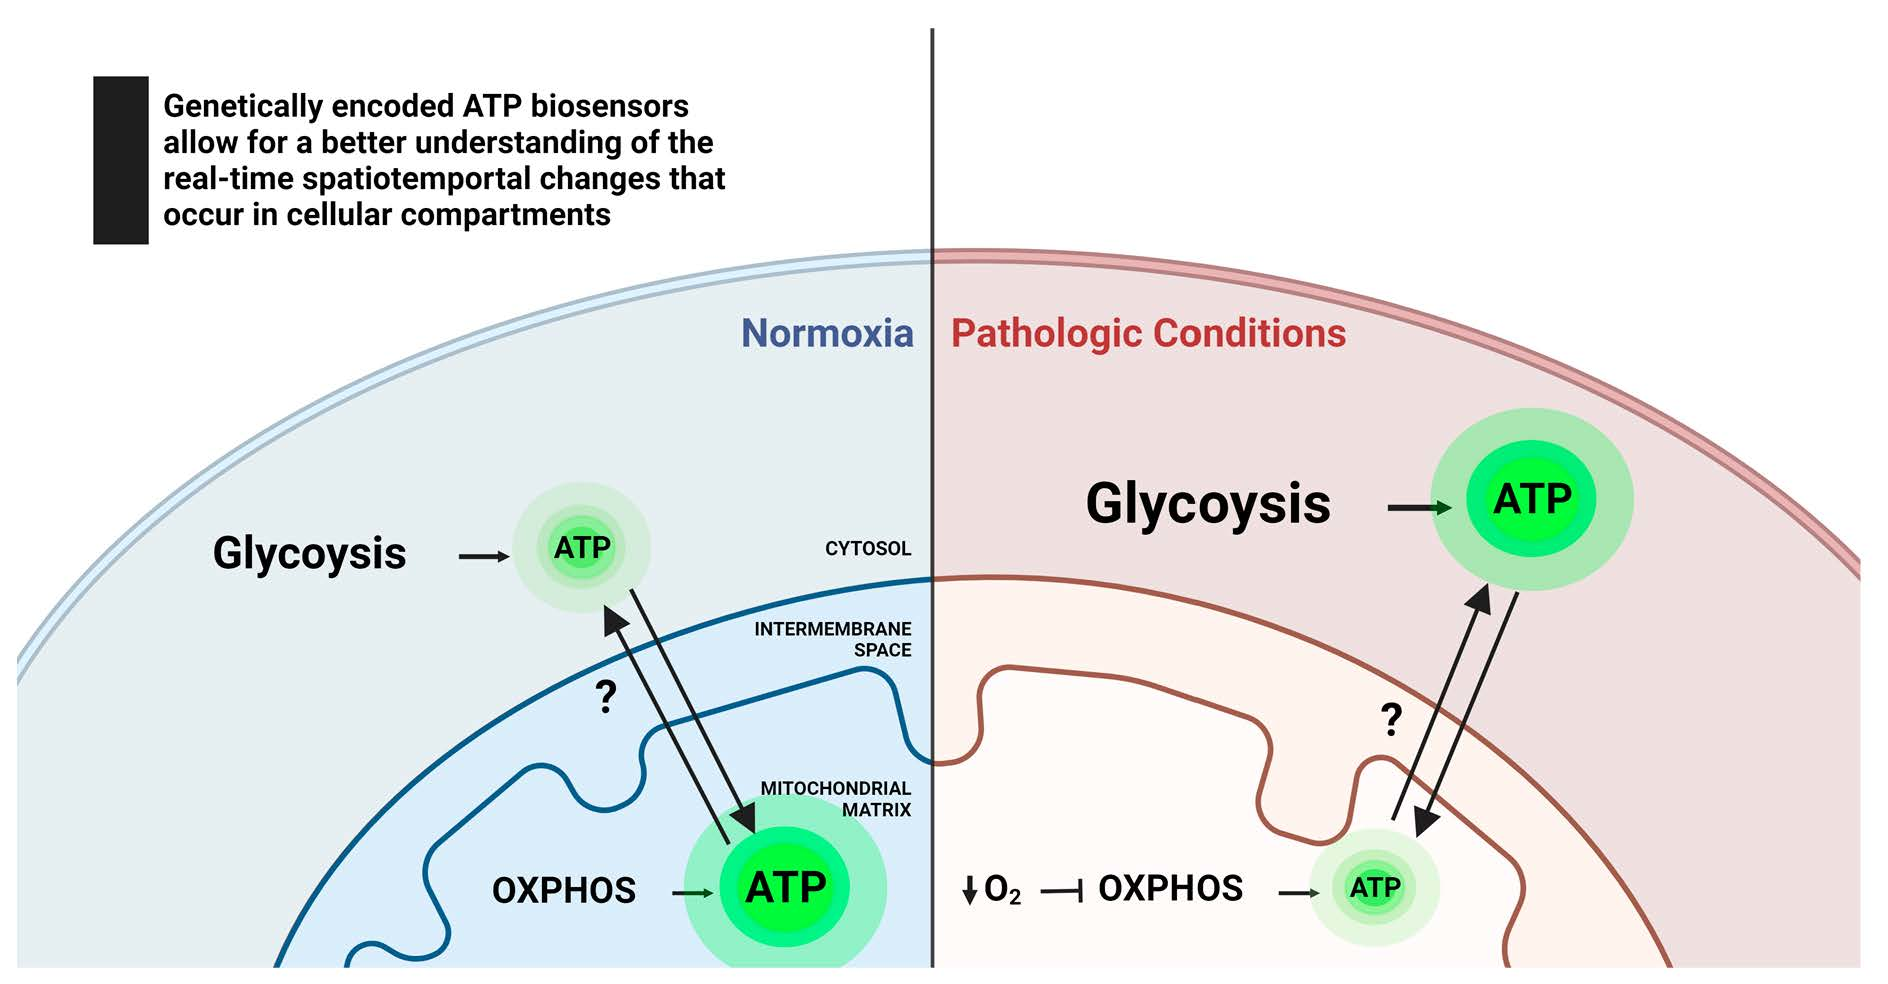 Direct Monitoring Cellular Dynamics | Biosensors Cells for Full-Text Free of ATP | ATP Genetically Encoded